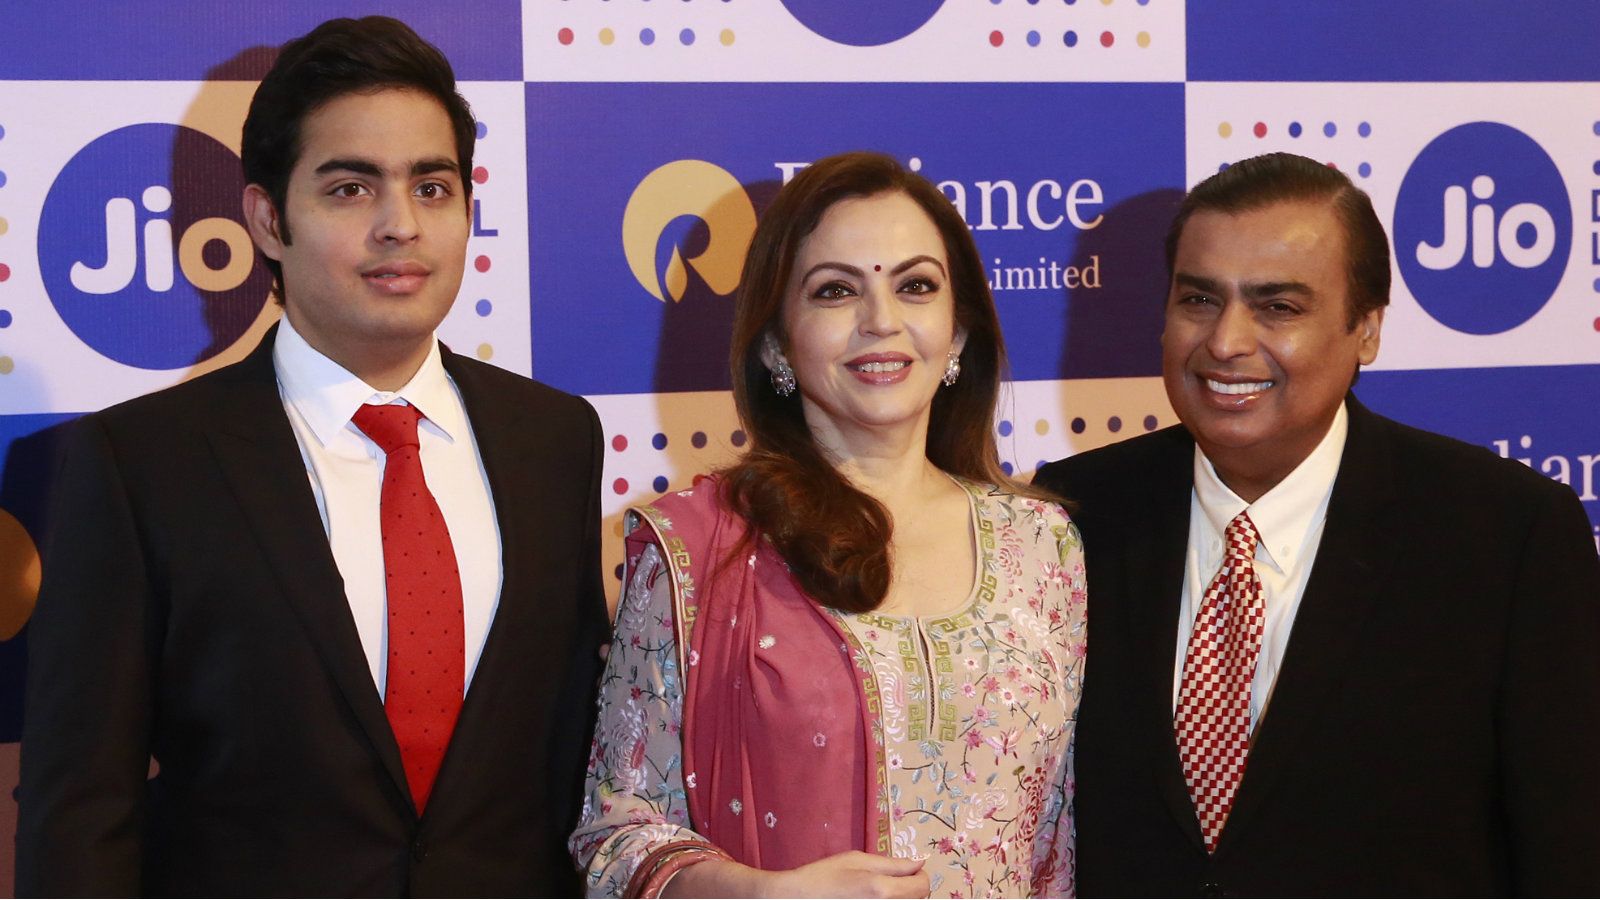 Awesome How India's Rich, Middle Class, And Poor Perceive - India's Richest Man Mukesh Ambani , HD Wallpaper & Backgrounds